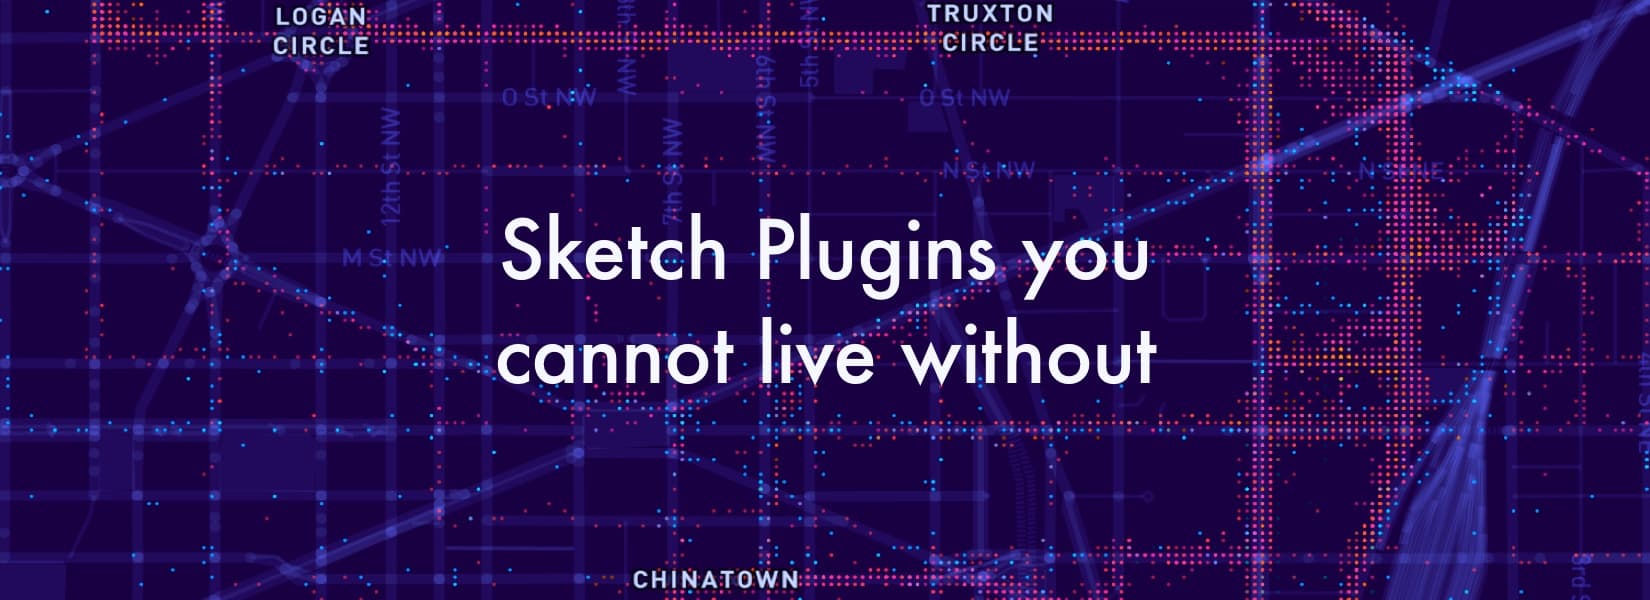 Sketch Plugins you cannot live without